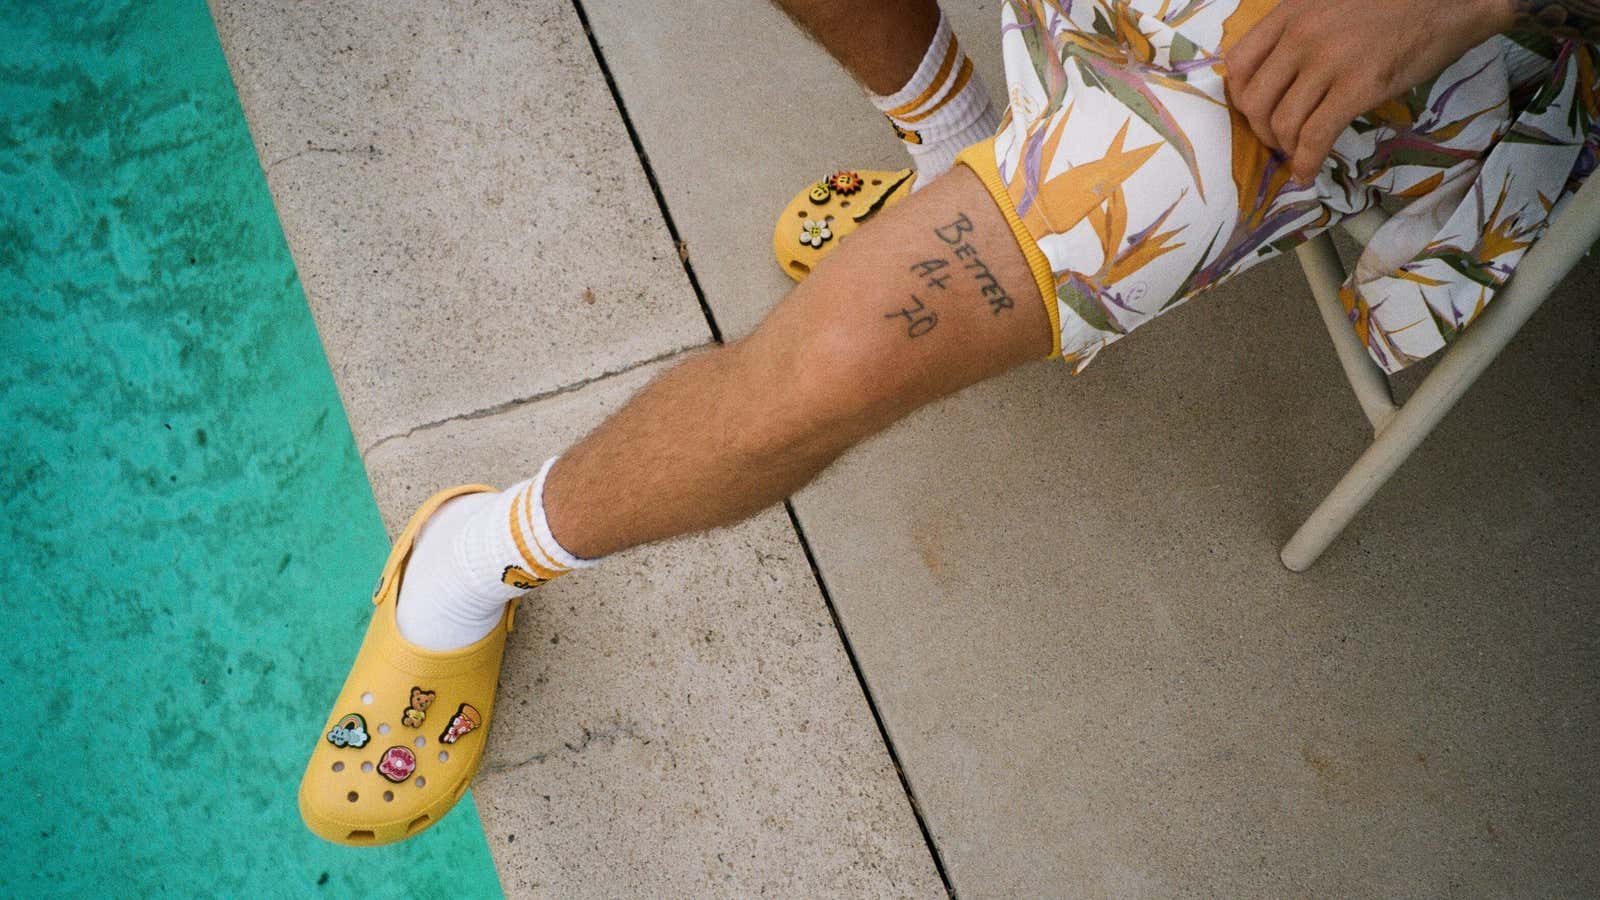 Collaborations with Justin Bieber, Bad Bunny are boosting Crocs